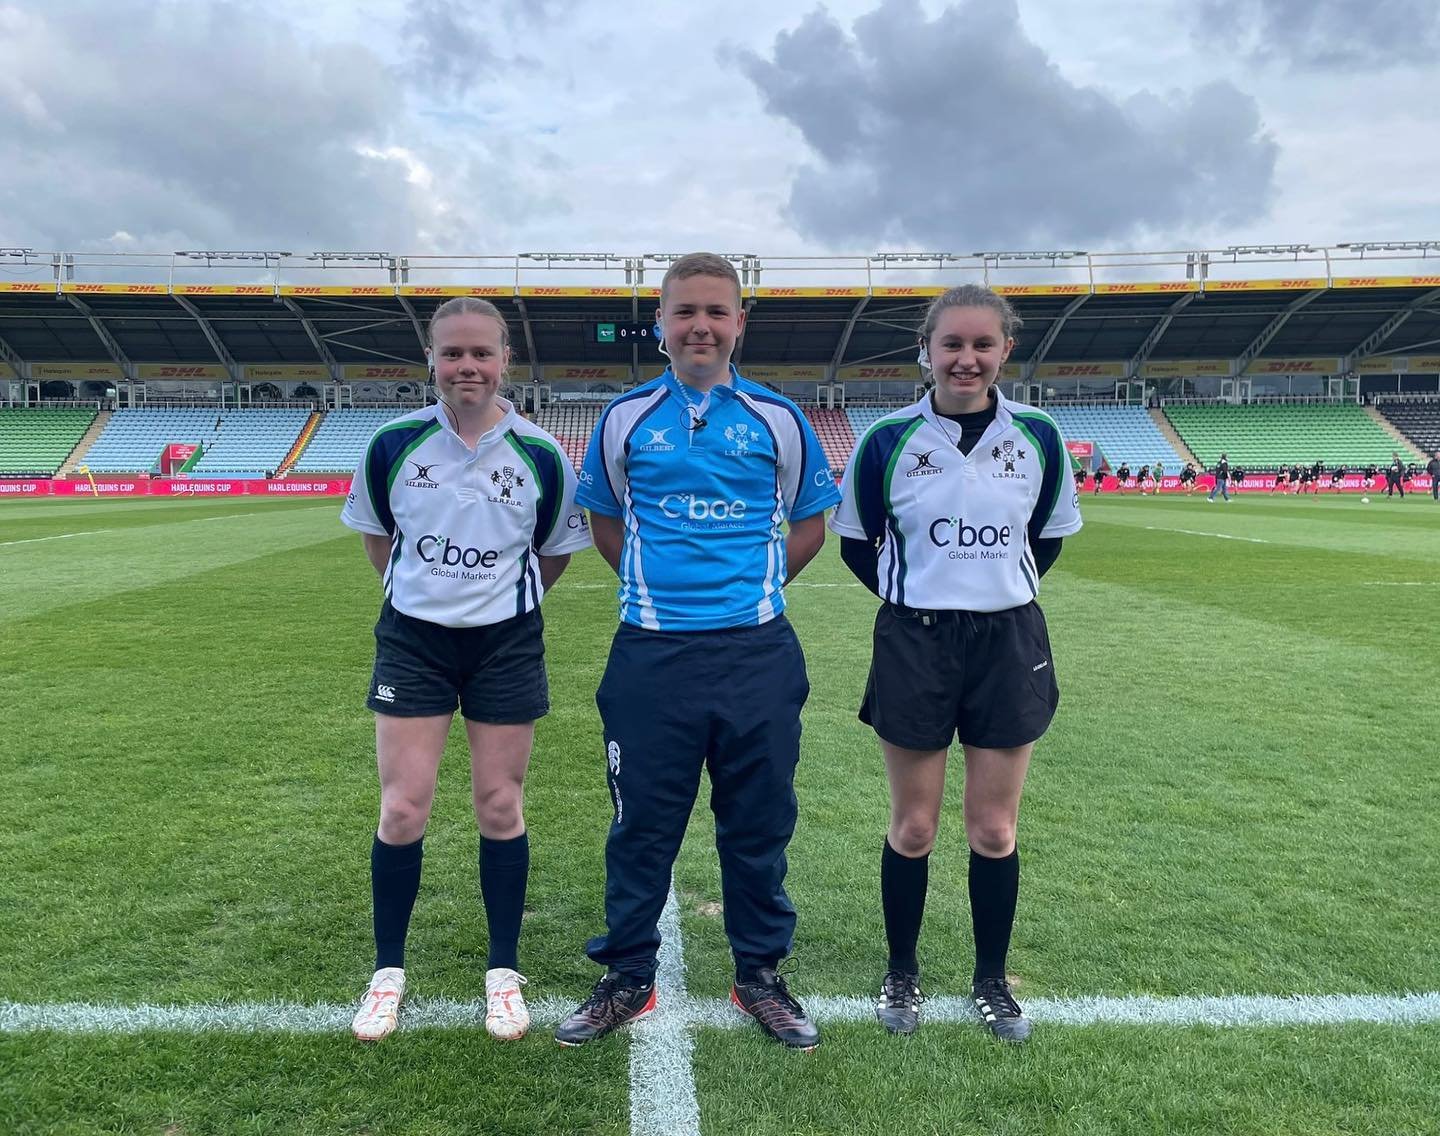 The Surrey Quin finals week at the Stoop started today! U15 Boys final team of 3 today - 
Ref: Morgan Softley
AR1: Elsa Willemsen 
AR2: Annie Hopper

London SW region have been leading the way with recruiting and nurturing of Youth Match Officials. T